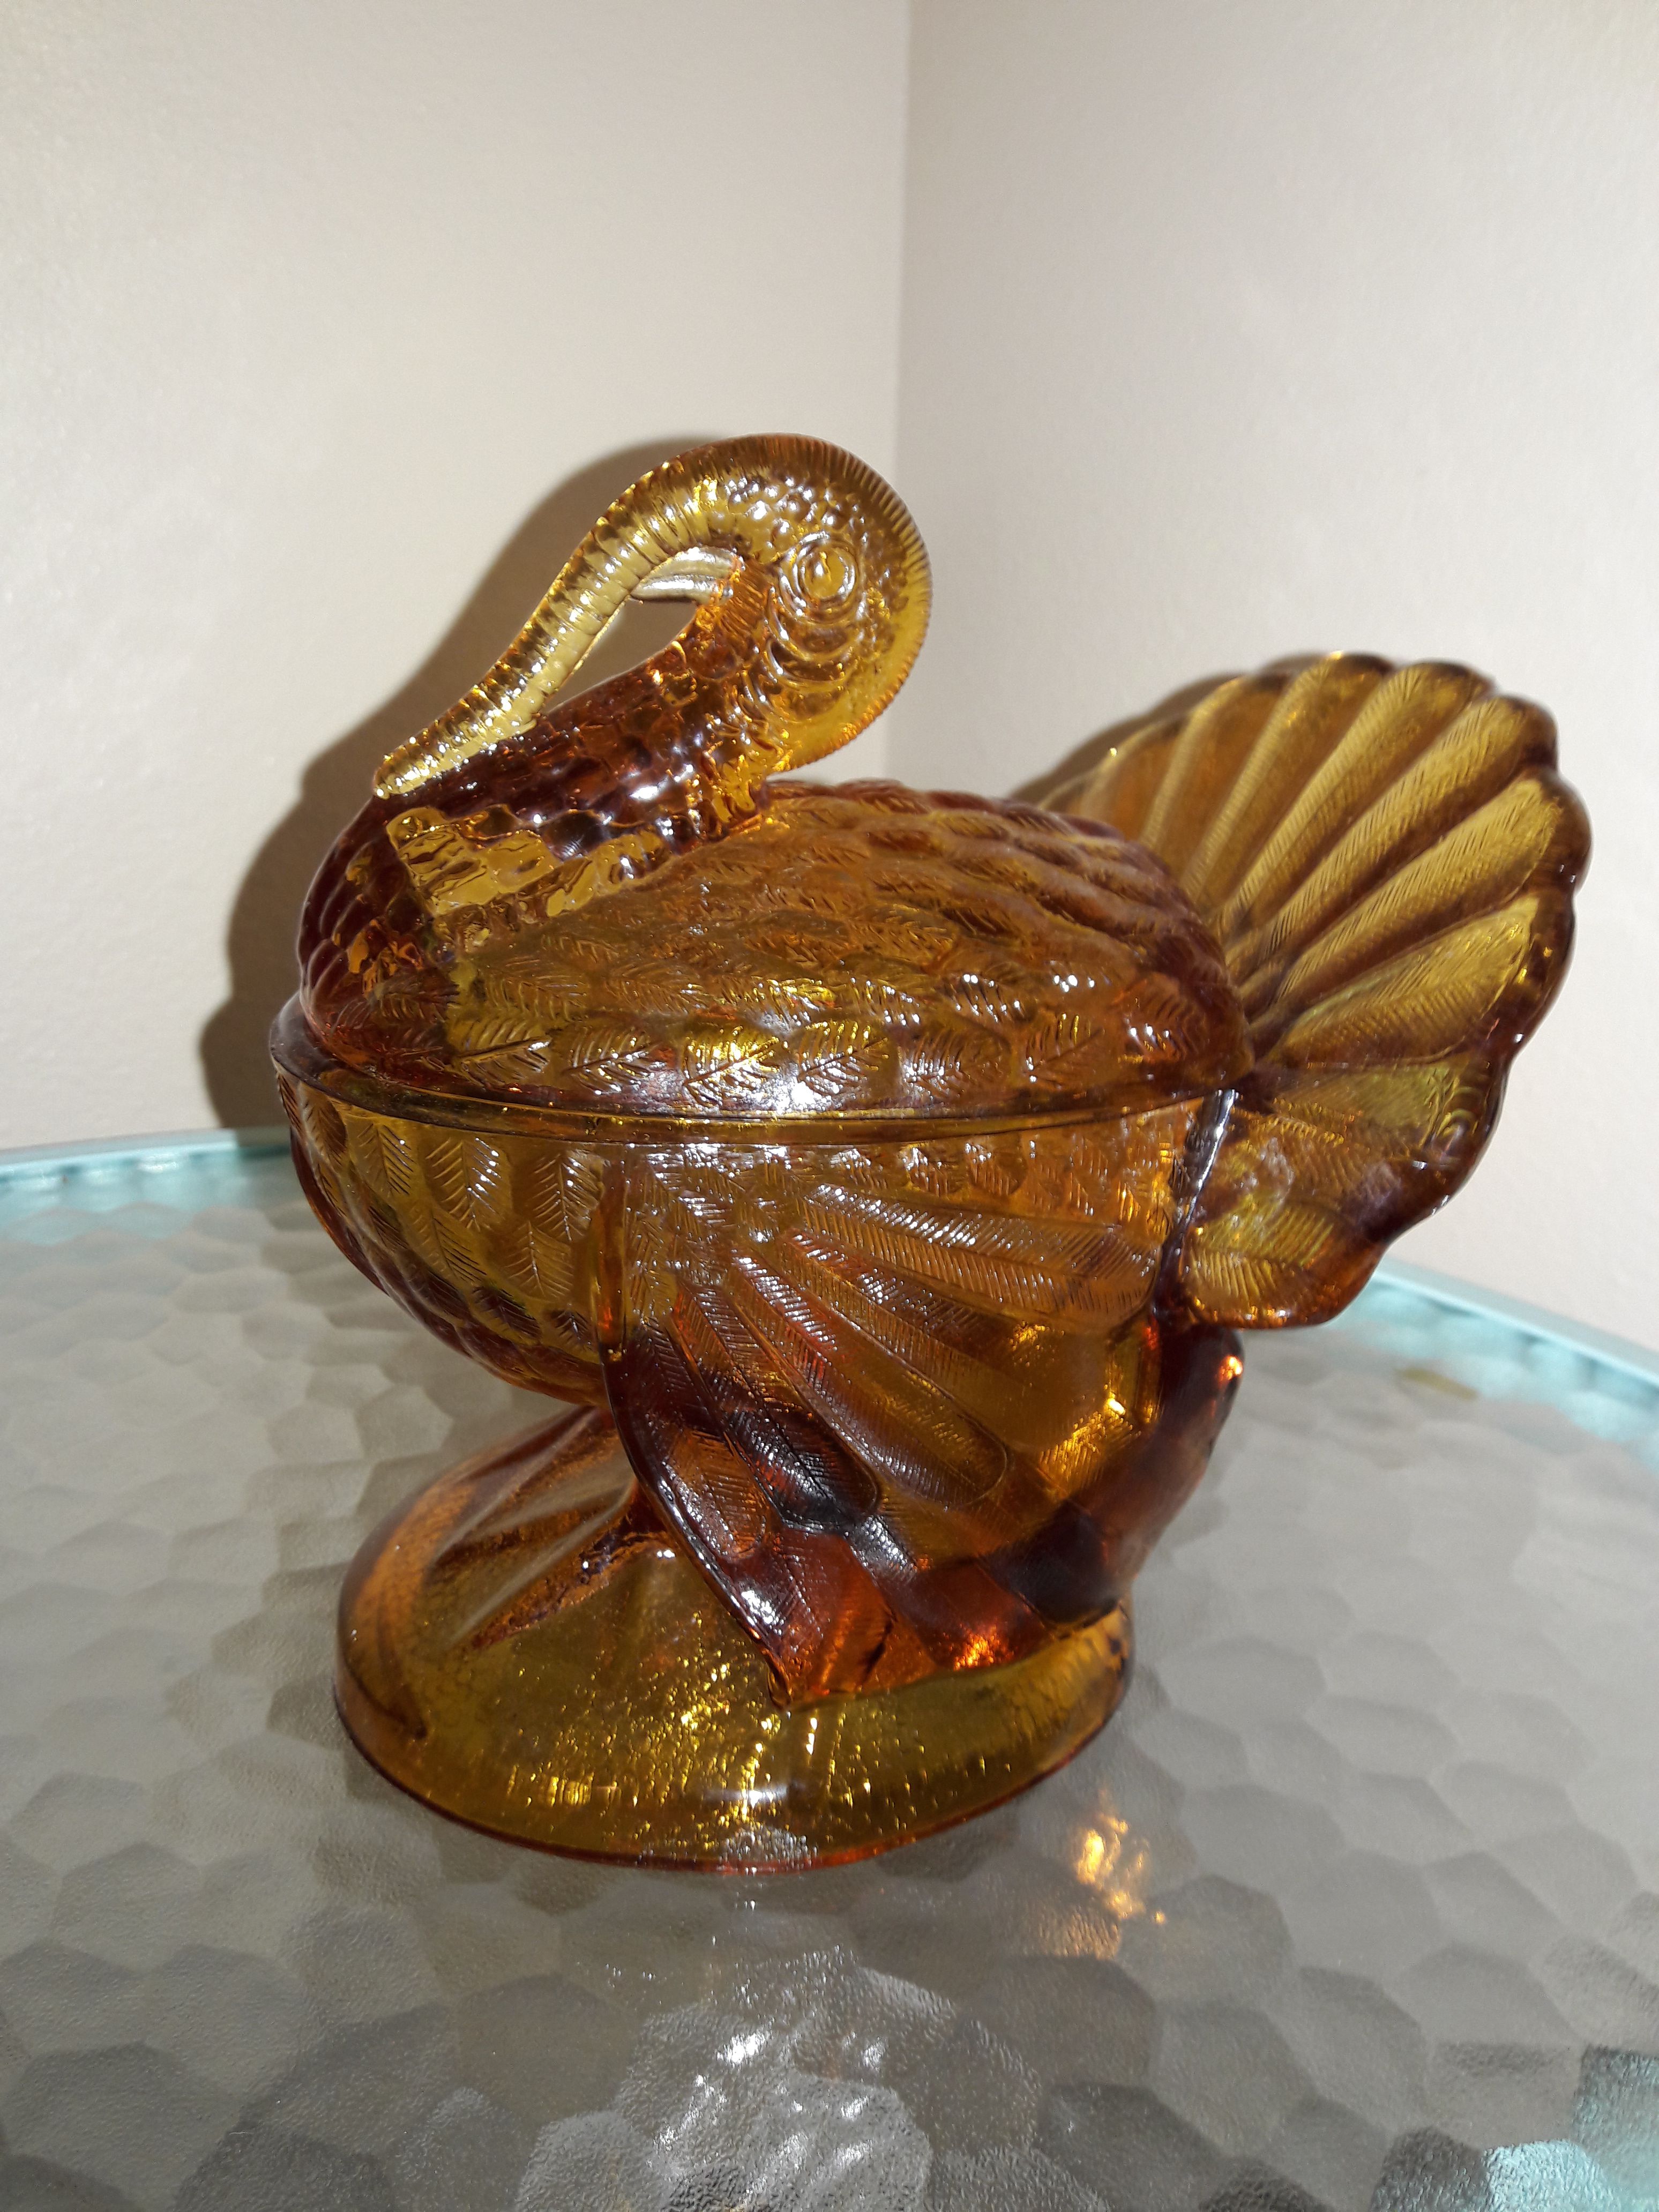 Antique L.E. Smith amber glass turkey dish for Sale in American Fork, UT -  OfferUp